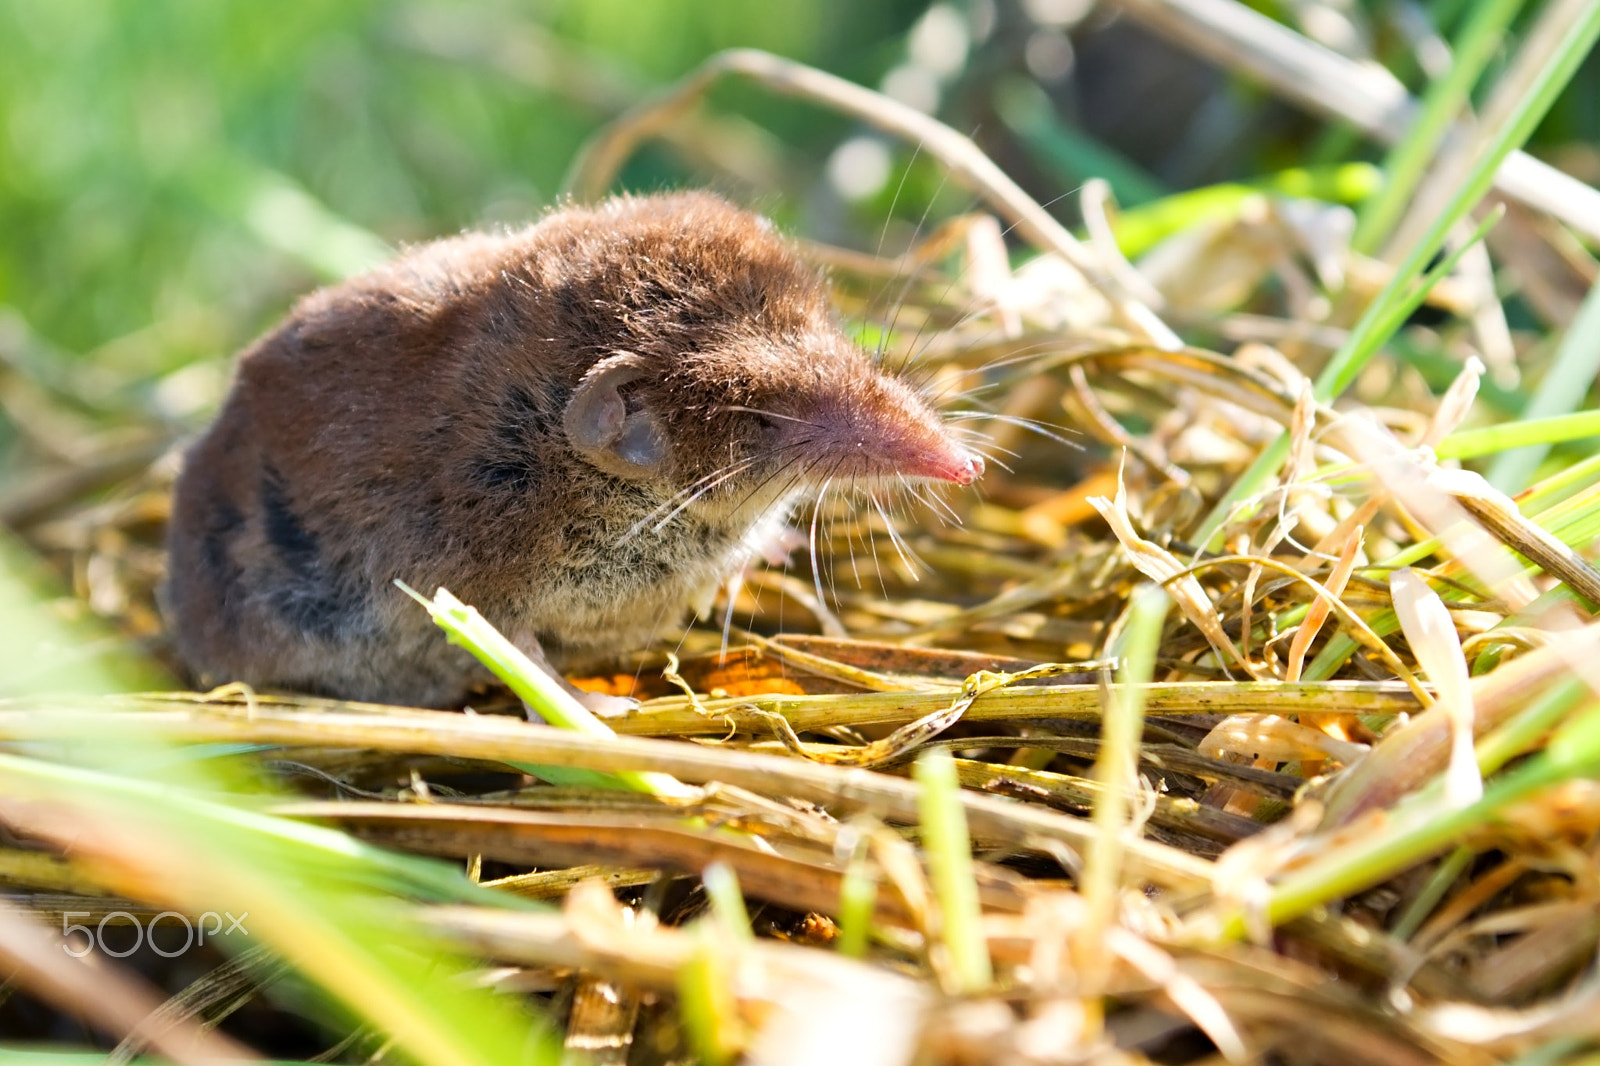 Nikon D5100 + 18.00 - 55.00 mm f/3.5 - 5.6 sample photo. Close up of the bicolored shrew in the nature photography